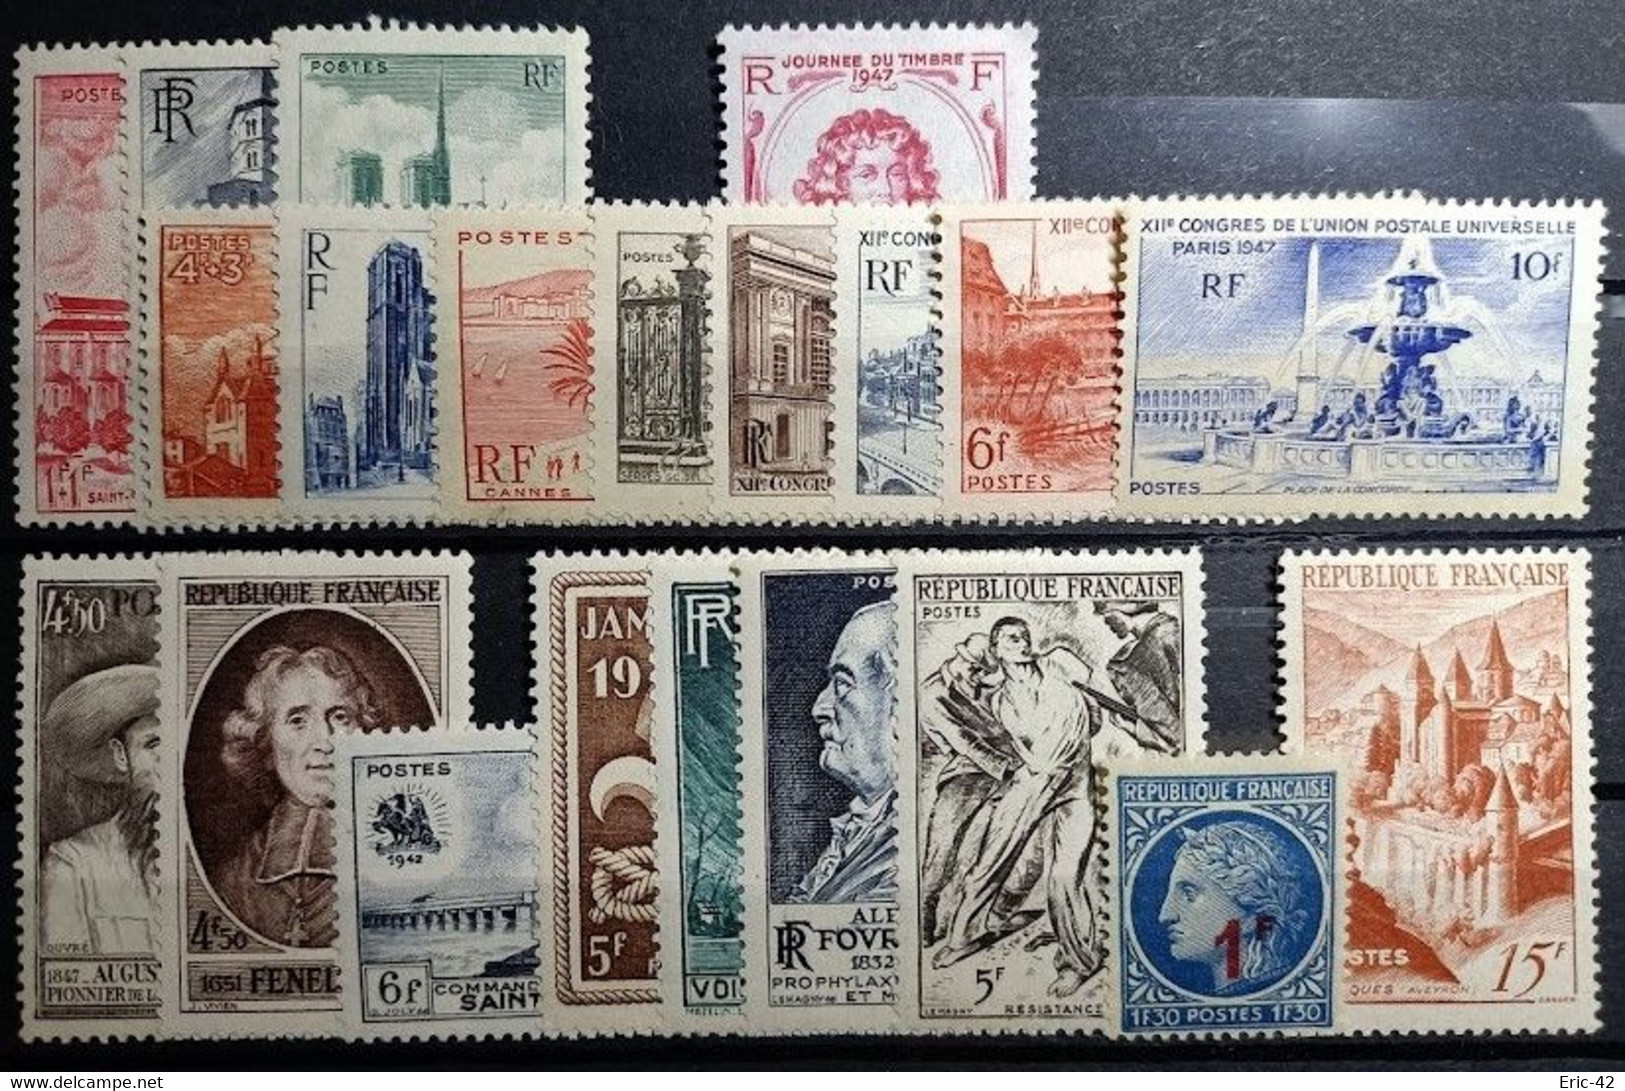 ANNEE 1947 COMPLETE NEUF** MNH - 1940-1949